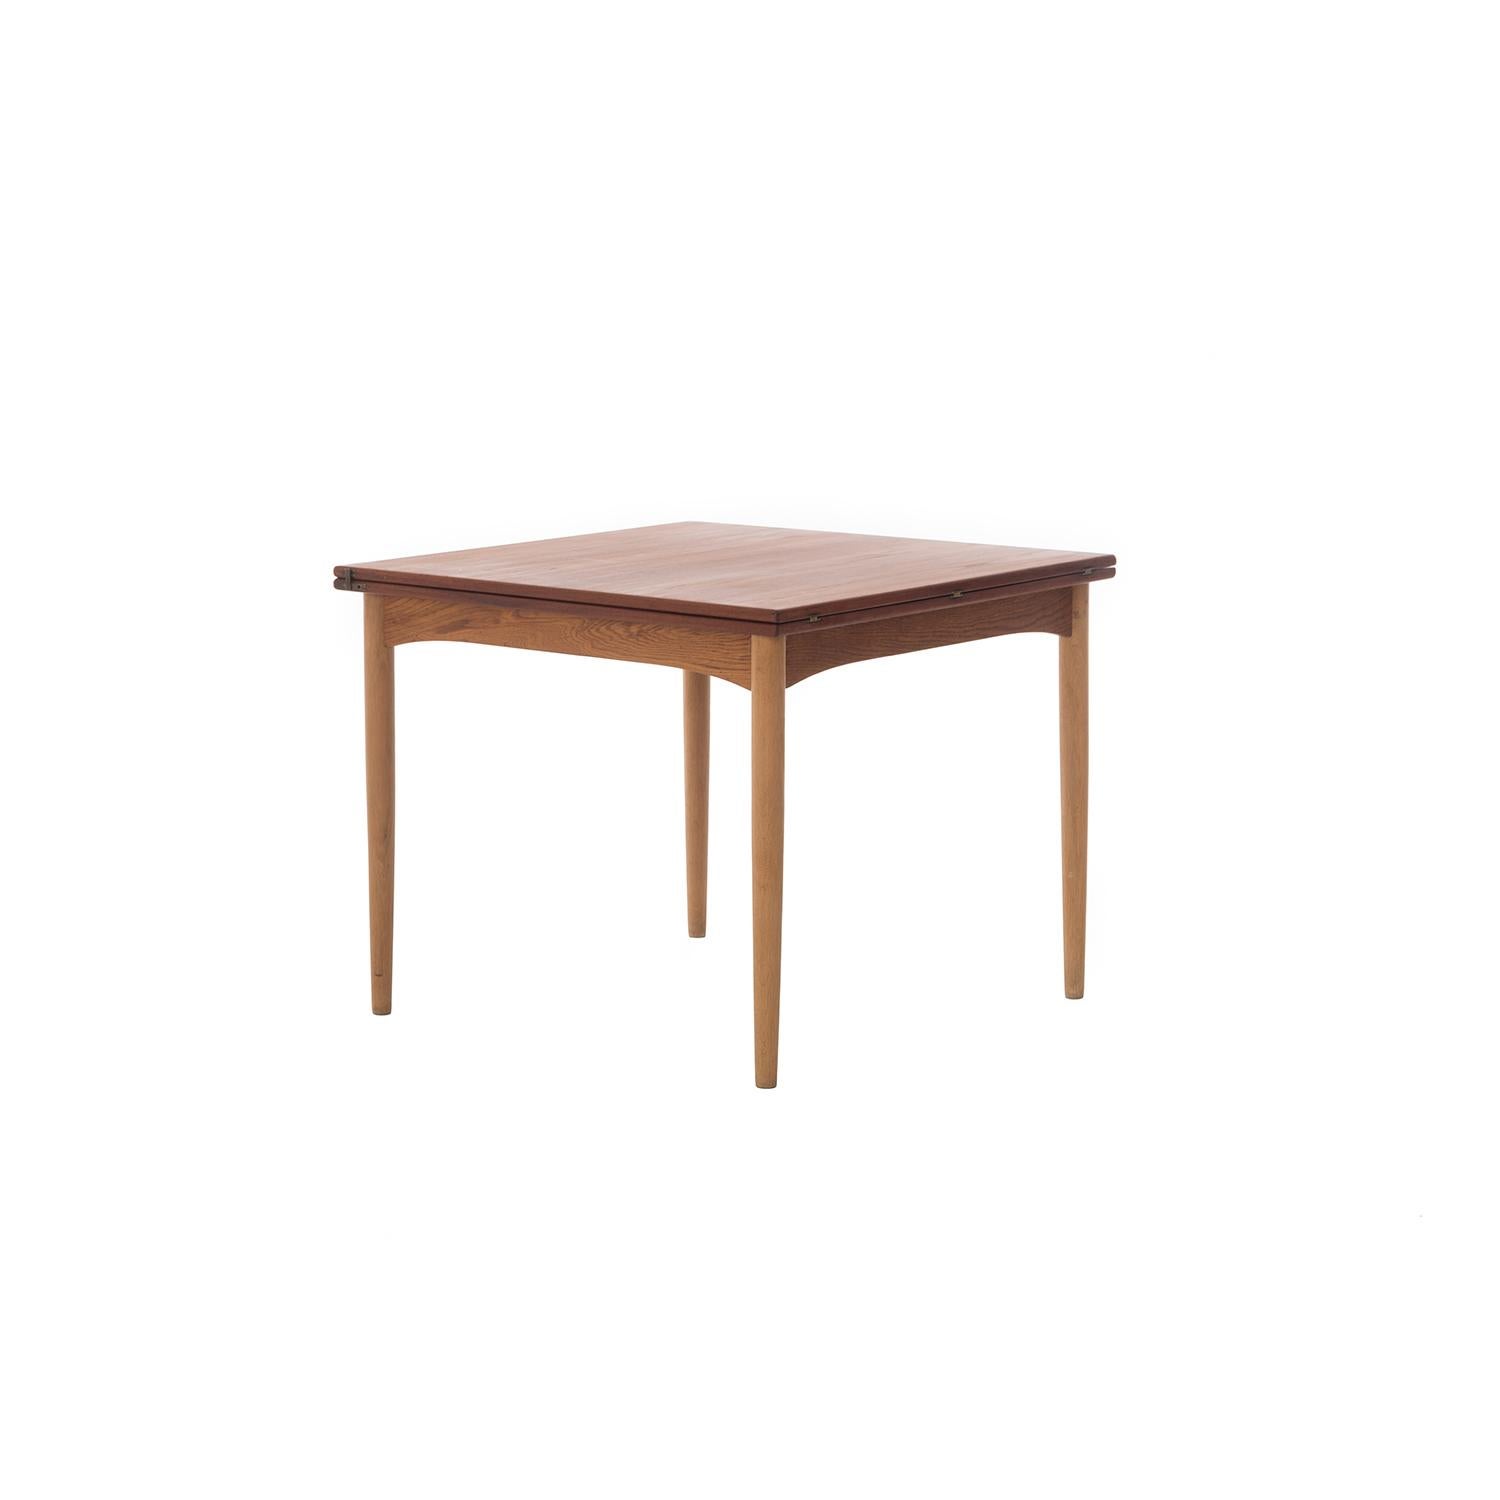 This elegant table opens from a square to a rectangle, the top slides over to accommodate the top. Apron is gently arched and lends to the table's sleek lines. Figured teak top with beautiful patina, brass hardware, oak skirt and legs. Børge